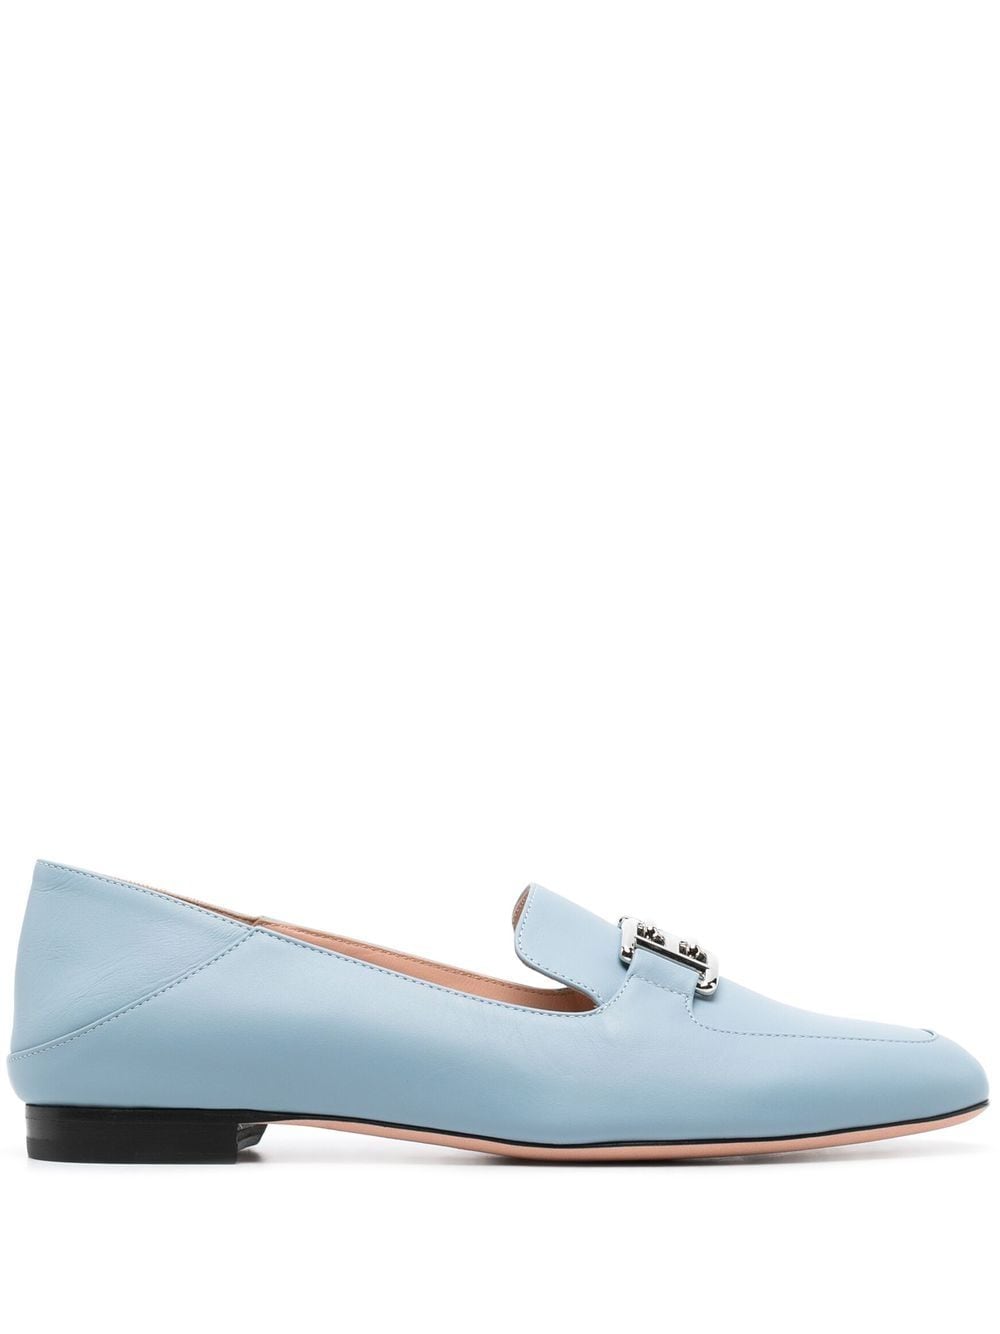 Bally Ellah leather loafers - Blue von Bally